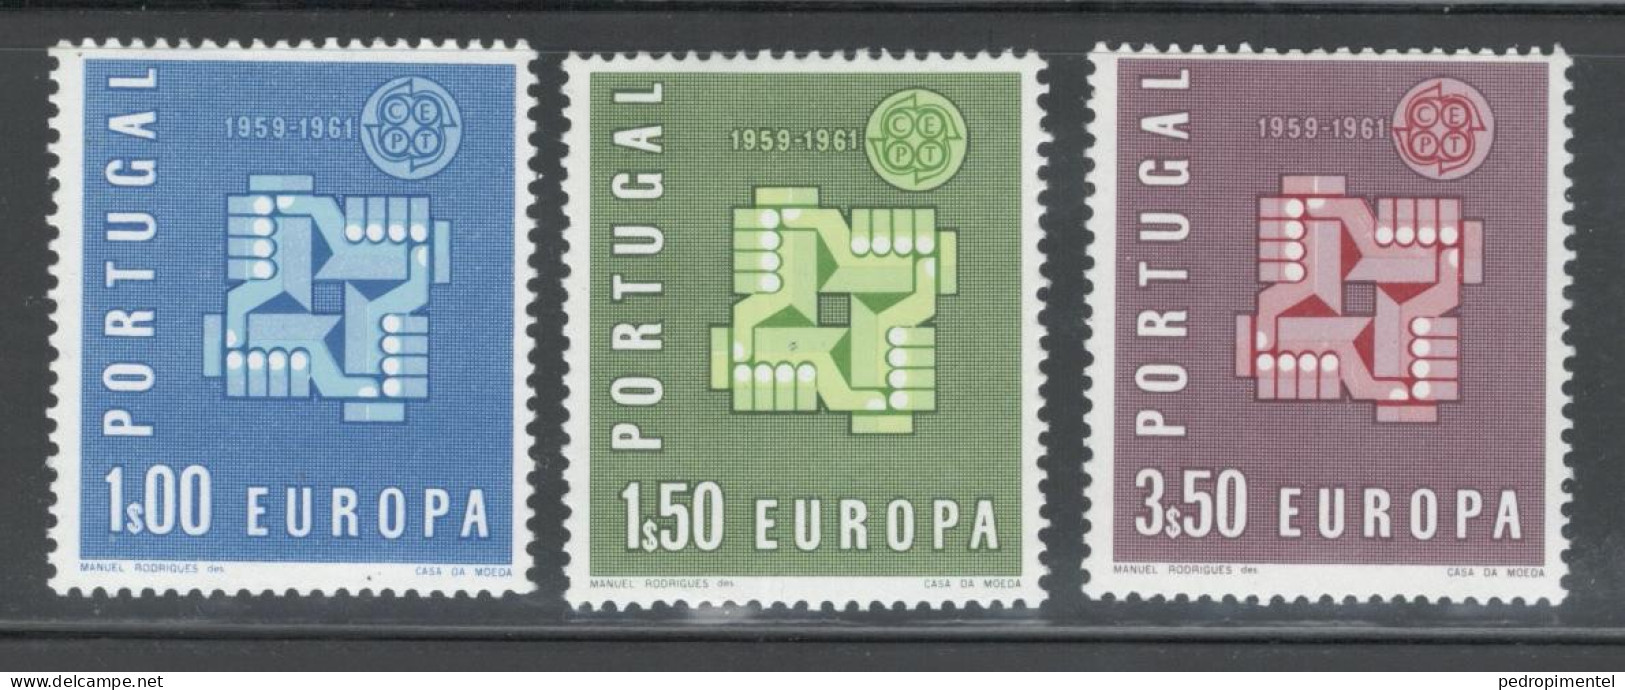 Portugal Stamps 1961 "Europa CEPT" Condition MH #878-880 - Unused Stamps